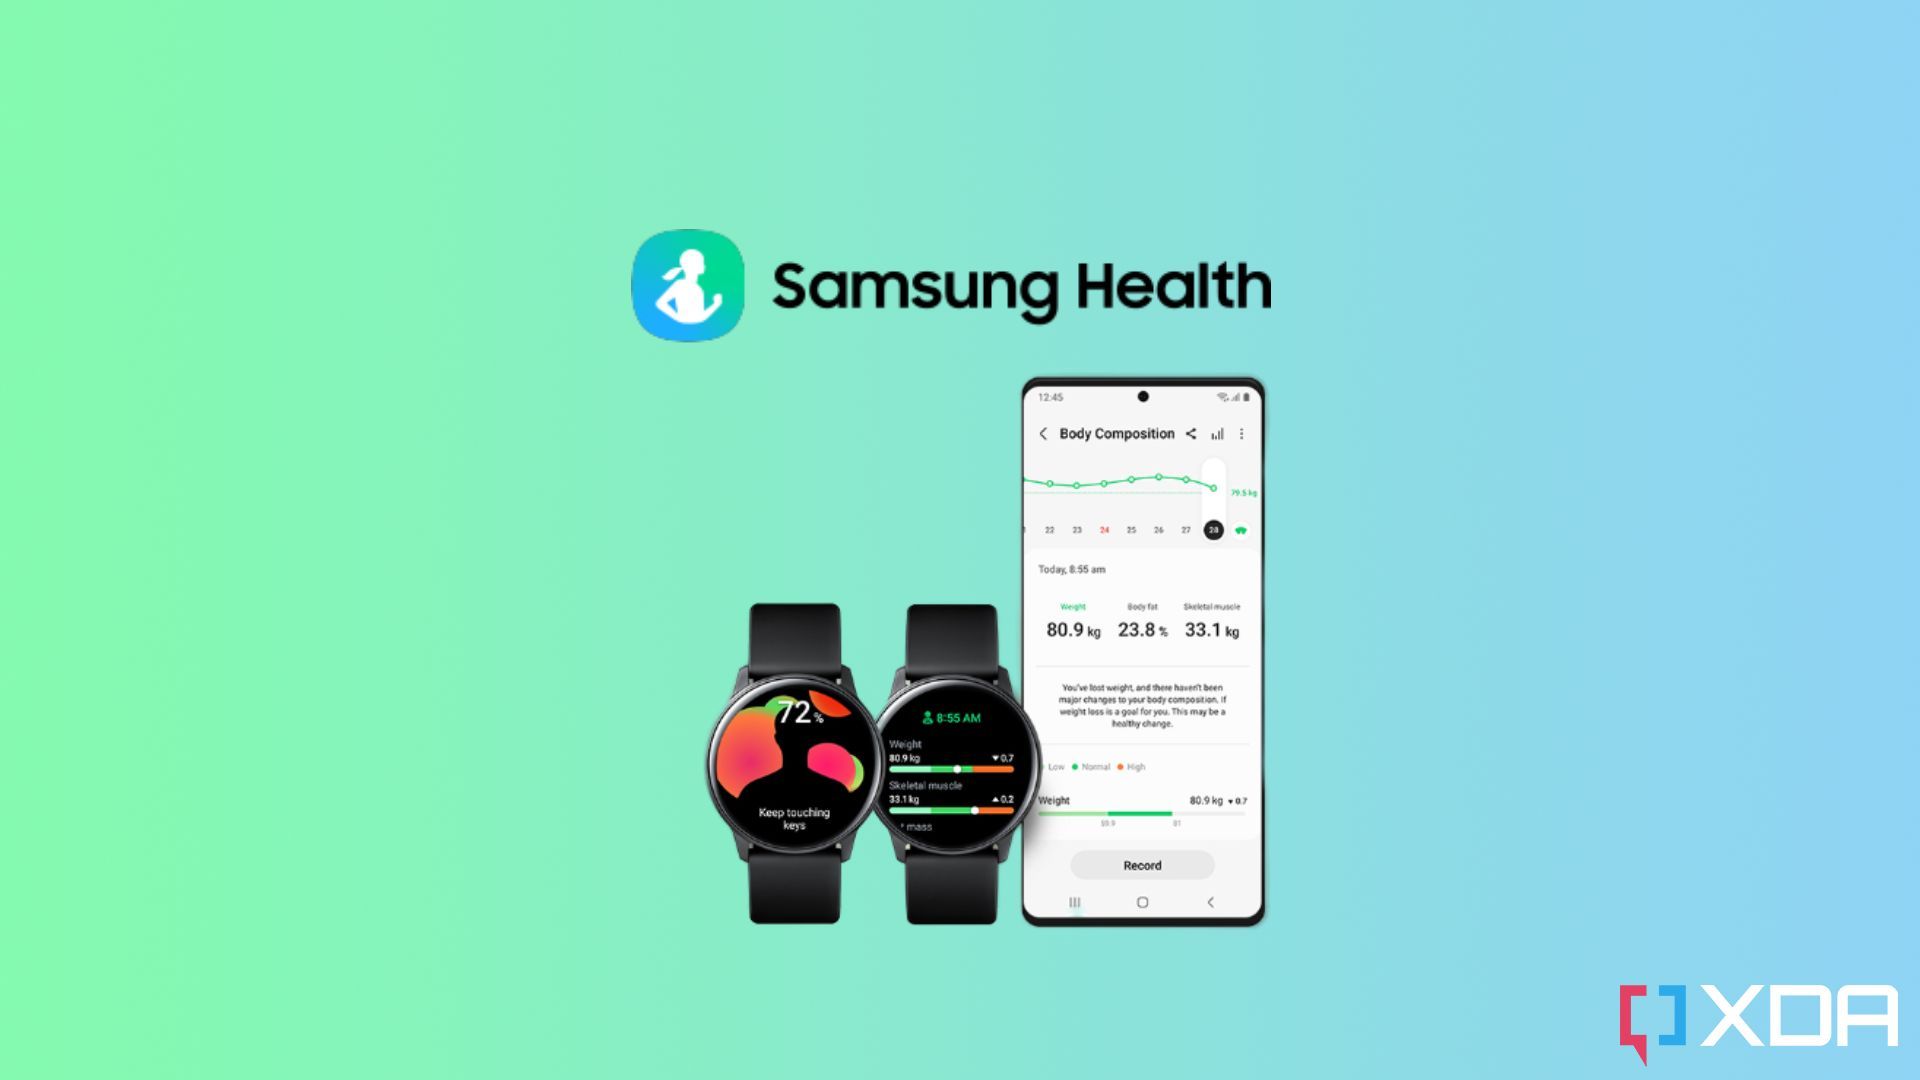 How to connect an accessory to Samsung Health